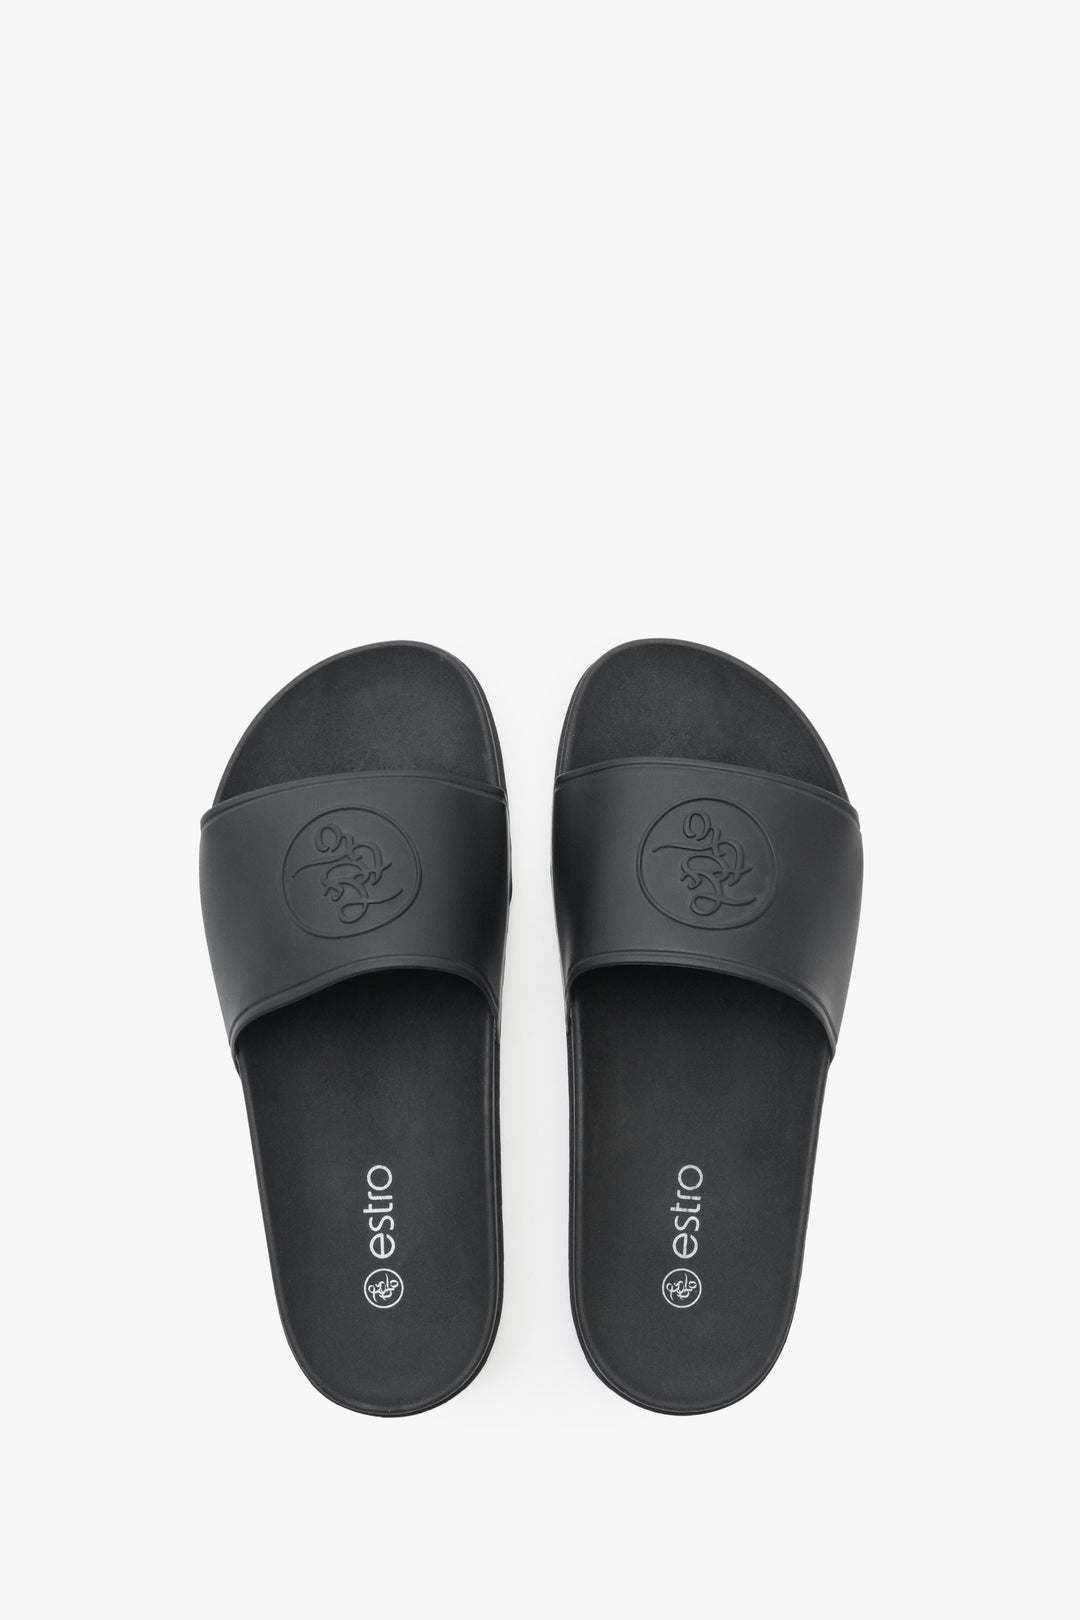 Women's black Estro rubber pool slides - presentation of the footwear from above.